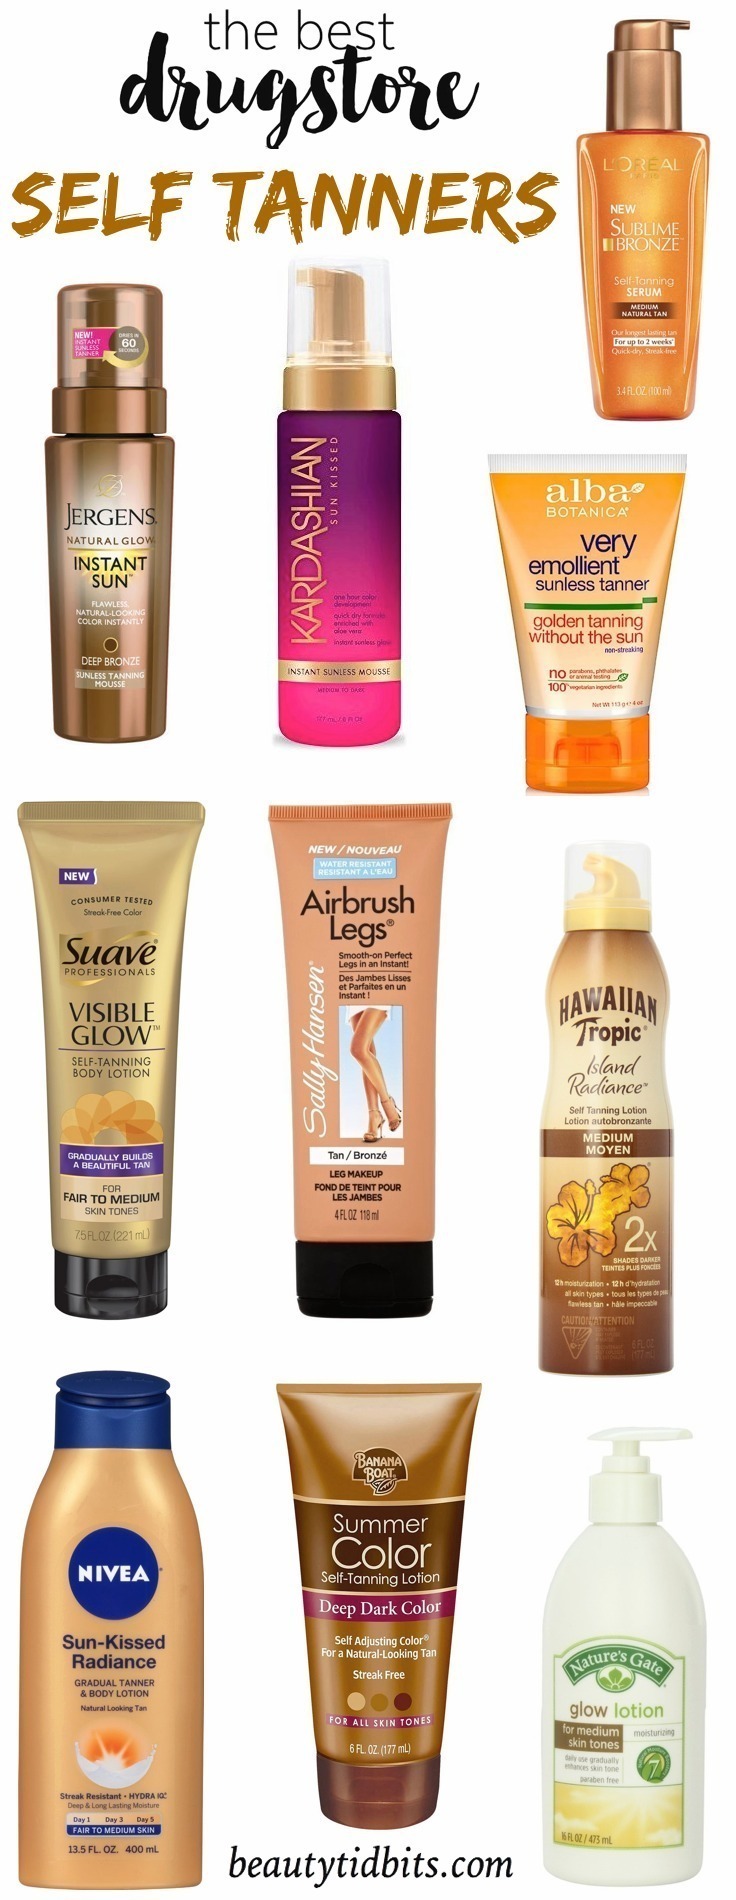 Best drugstore self tanners for face and body | From mousse to lotions and gels, these budget-friendly self-tanners will help you get that bronzed glow without the telltale smell or streaks!